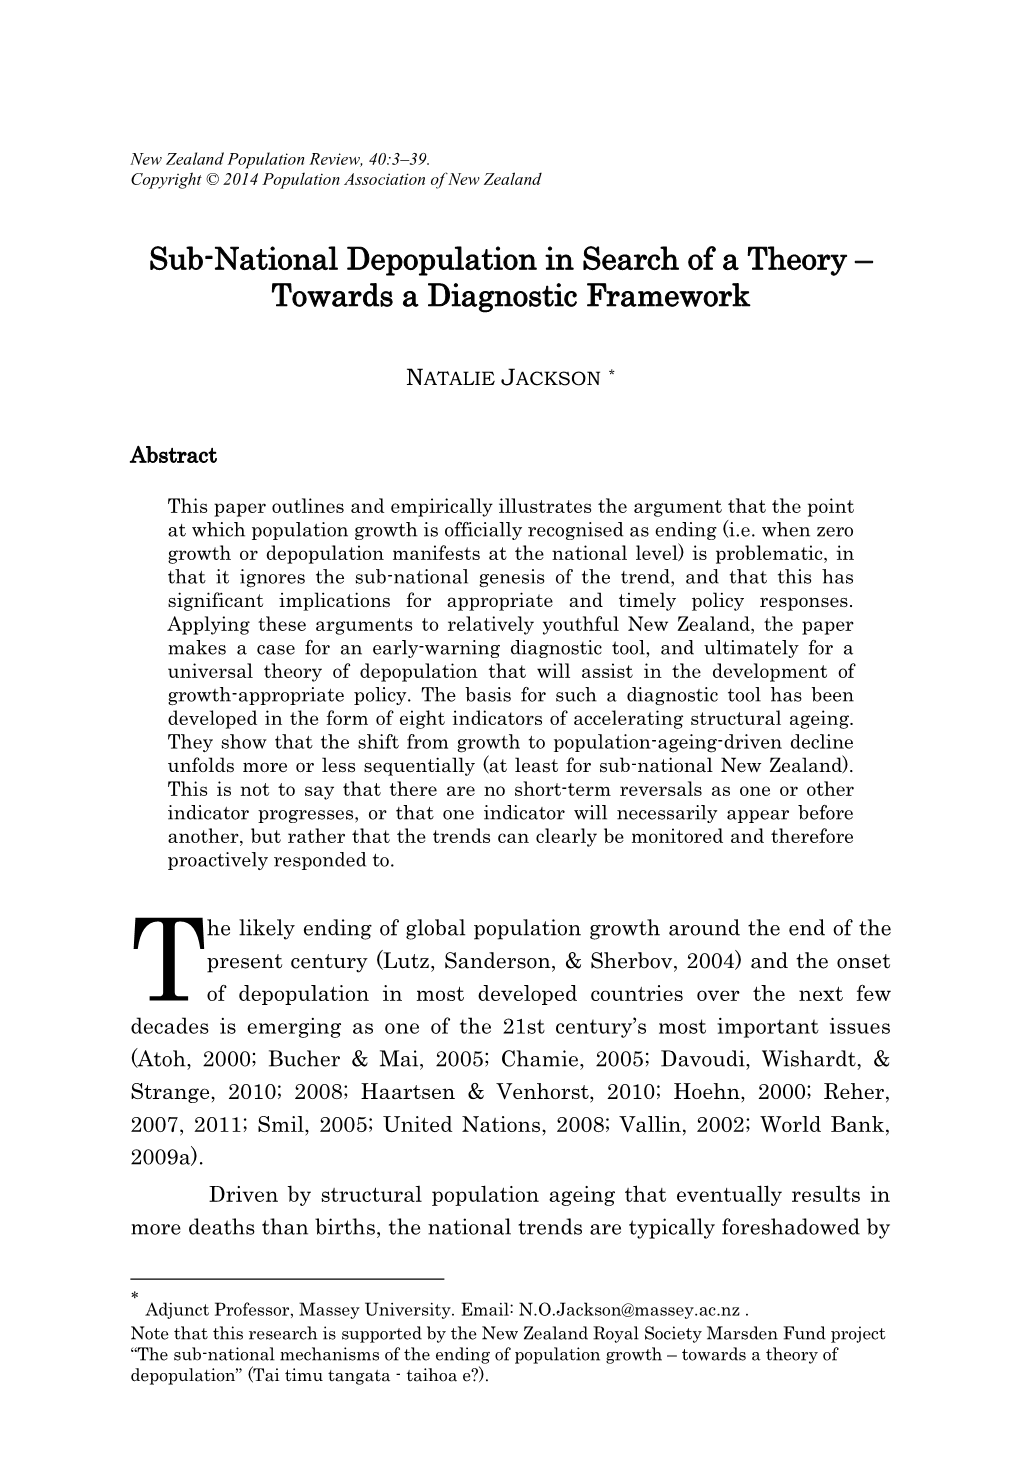 Sub-National Depopulation in Search of a Theory – Towards a Diagnostic Framework